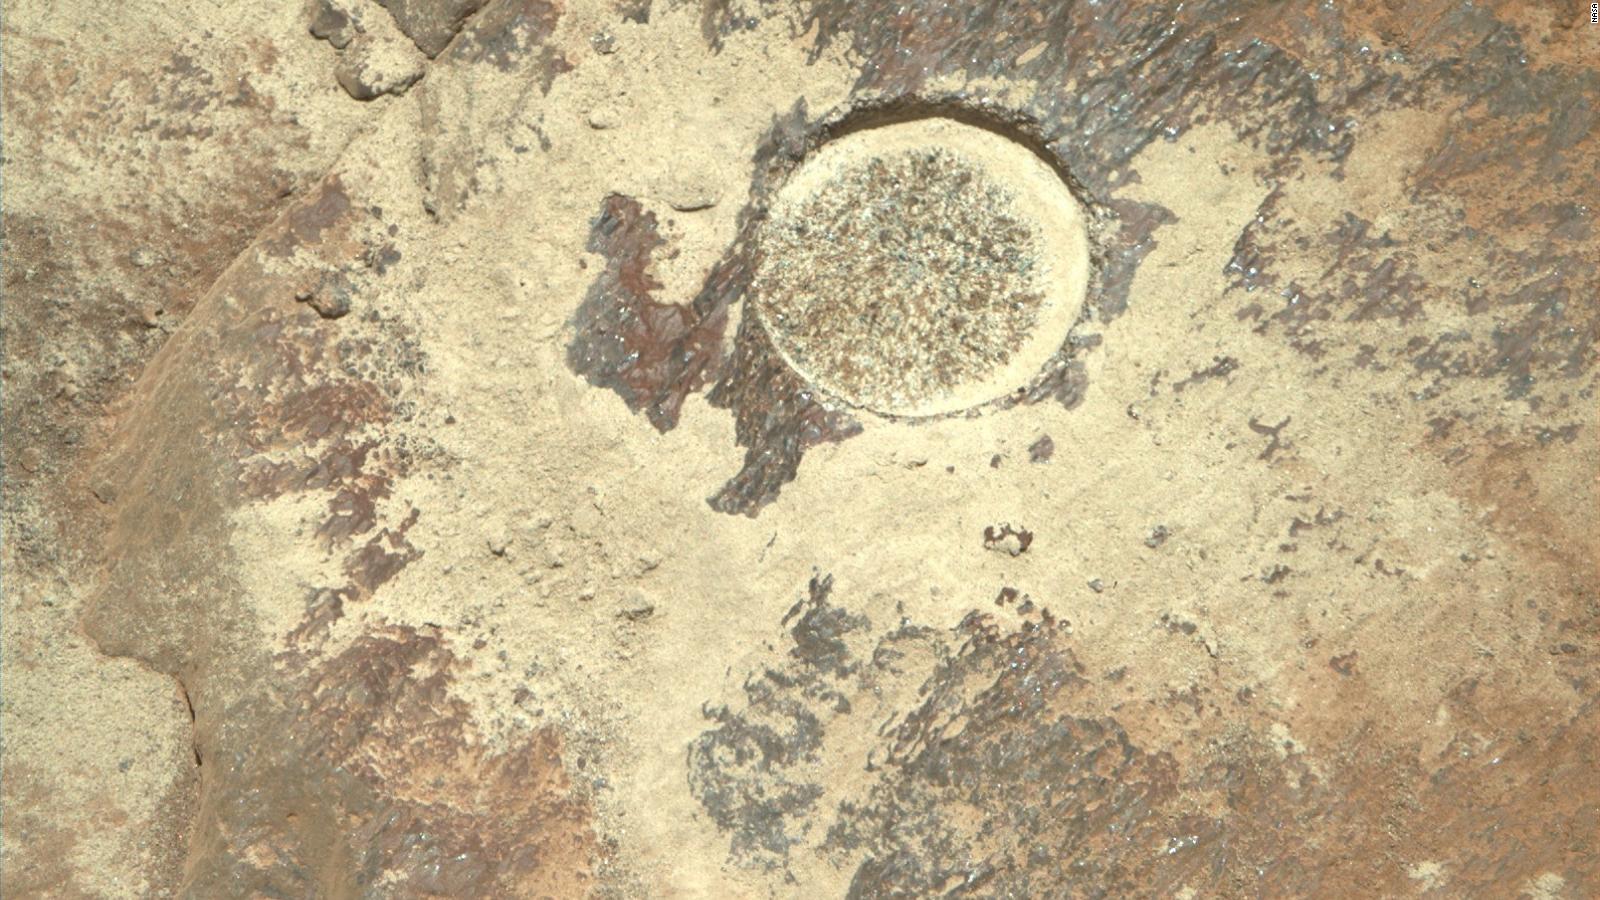 On Mars the rover diligently discovered something “never seen before” under a rock